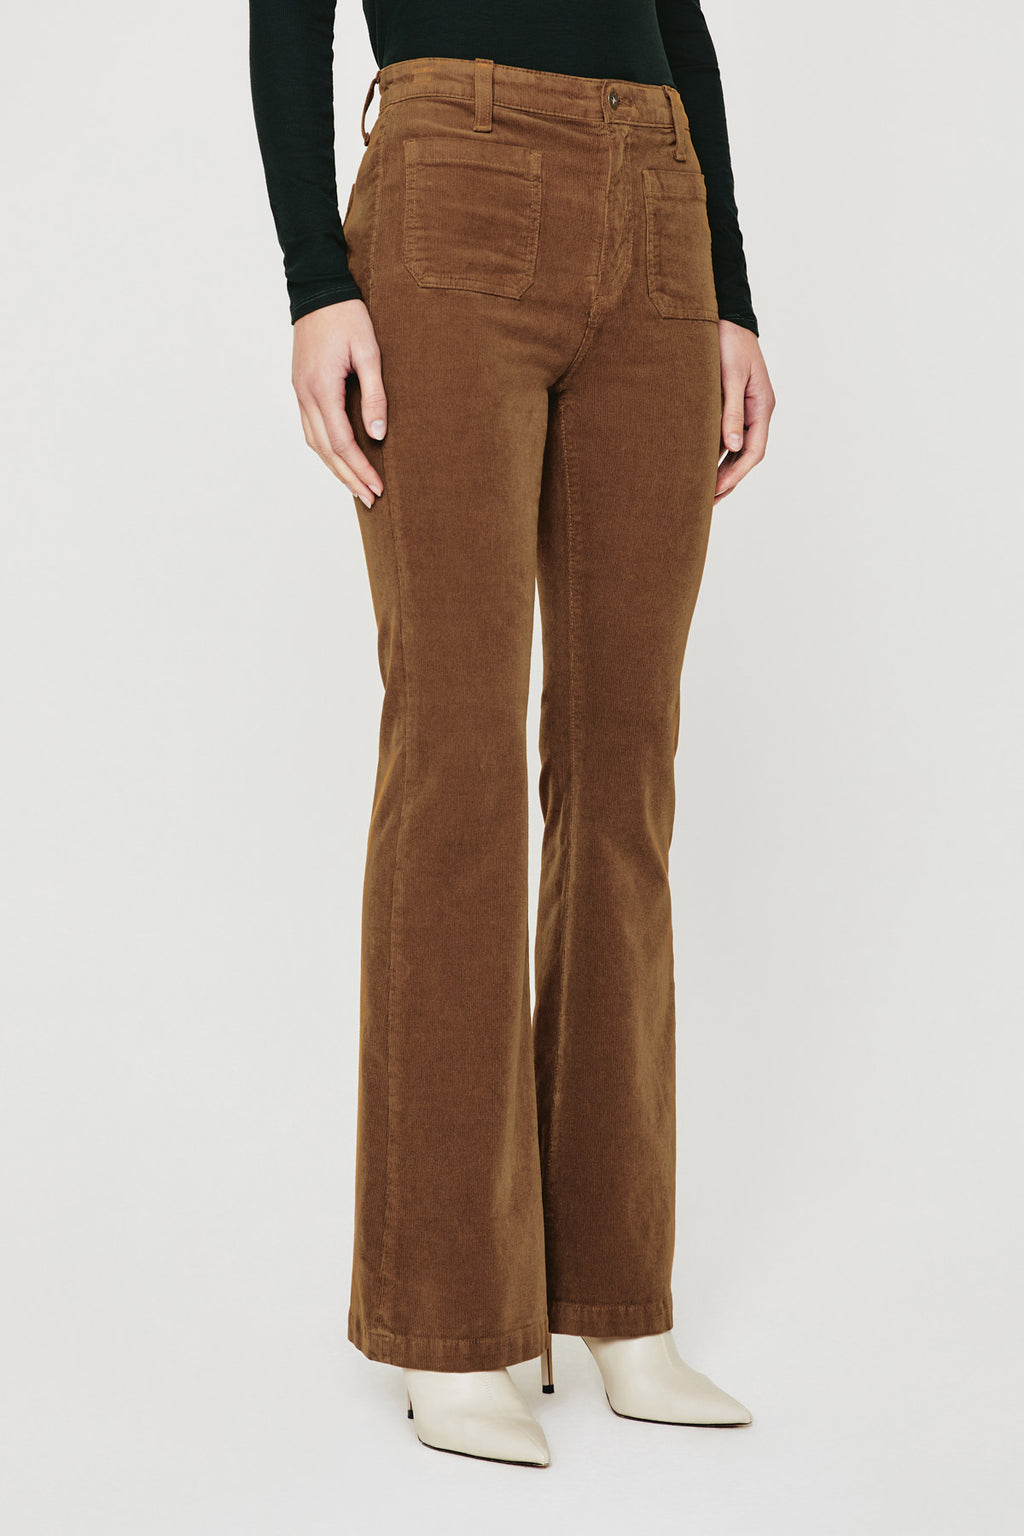 AG Patch Pocket Corduroy Pant in Caramel